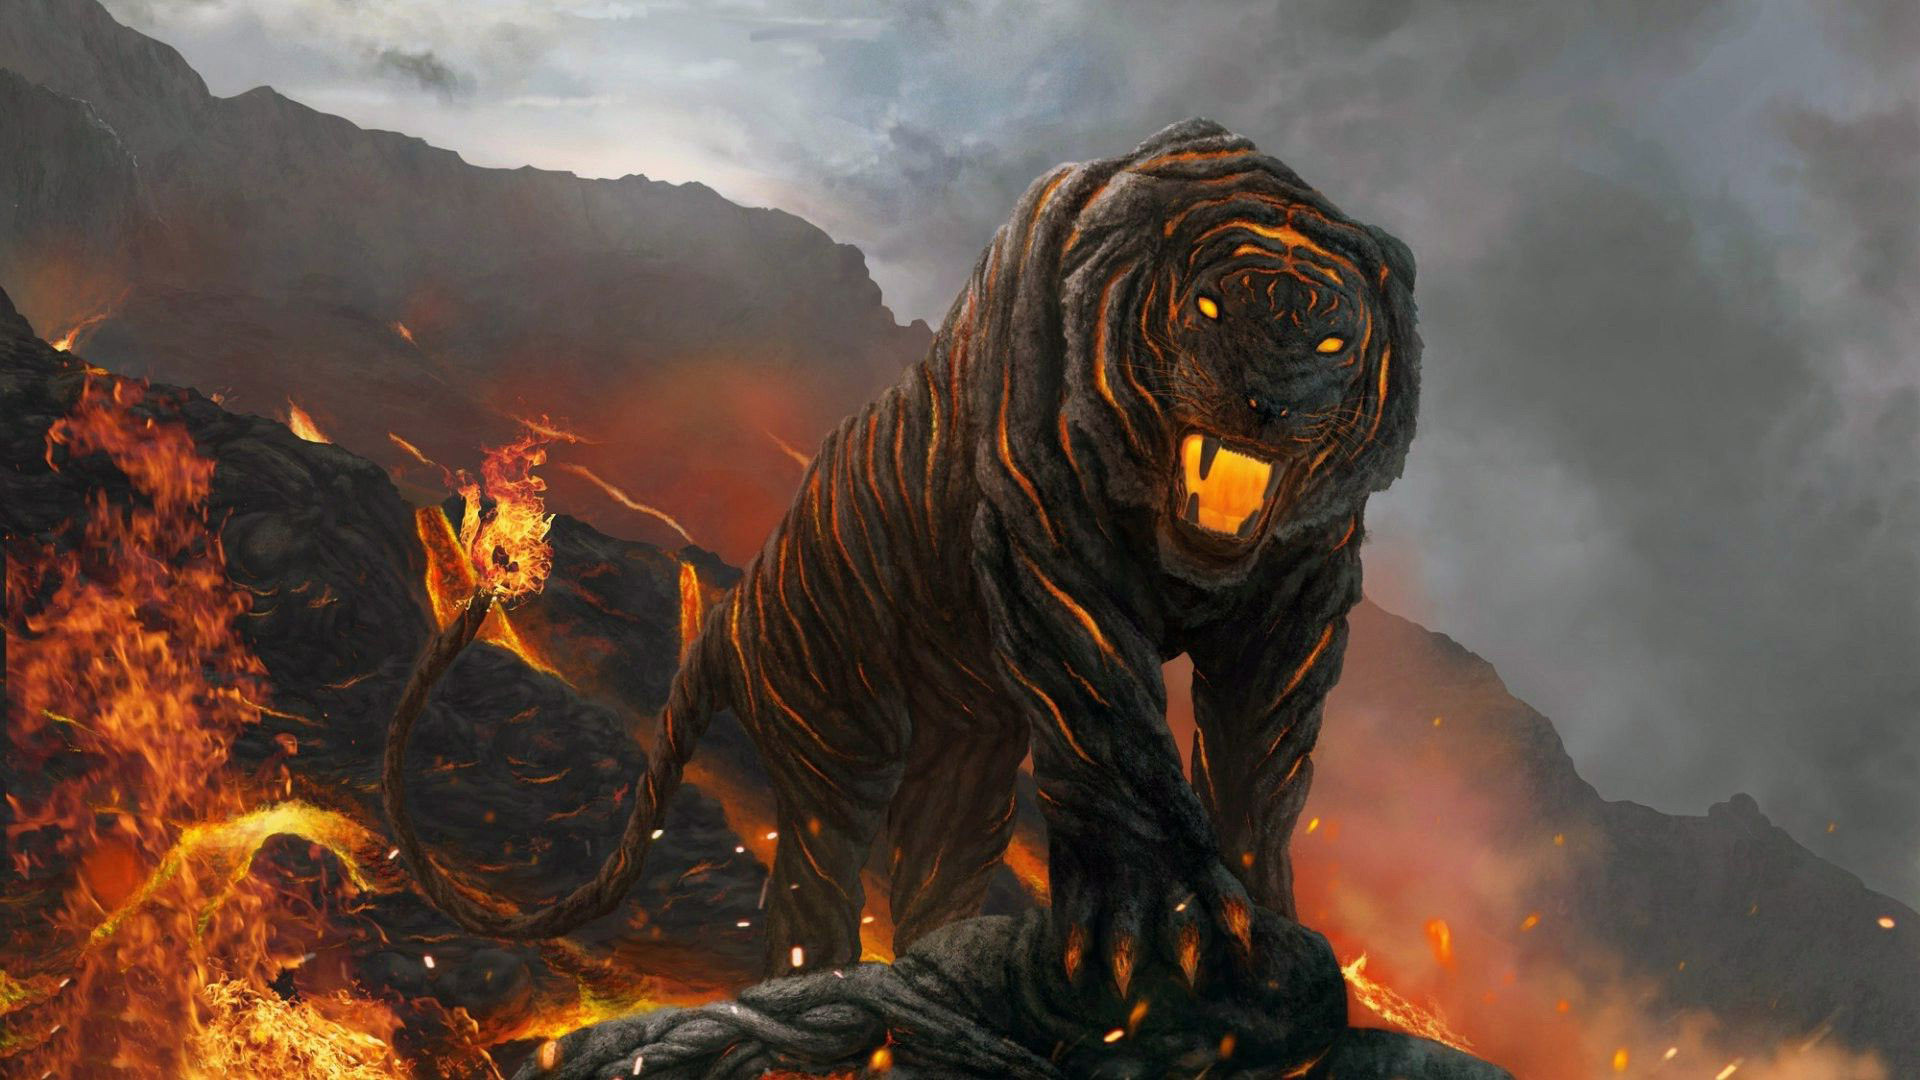 1920x1080 tiger head fire wallpaper download hd collection | hd wallpapers .